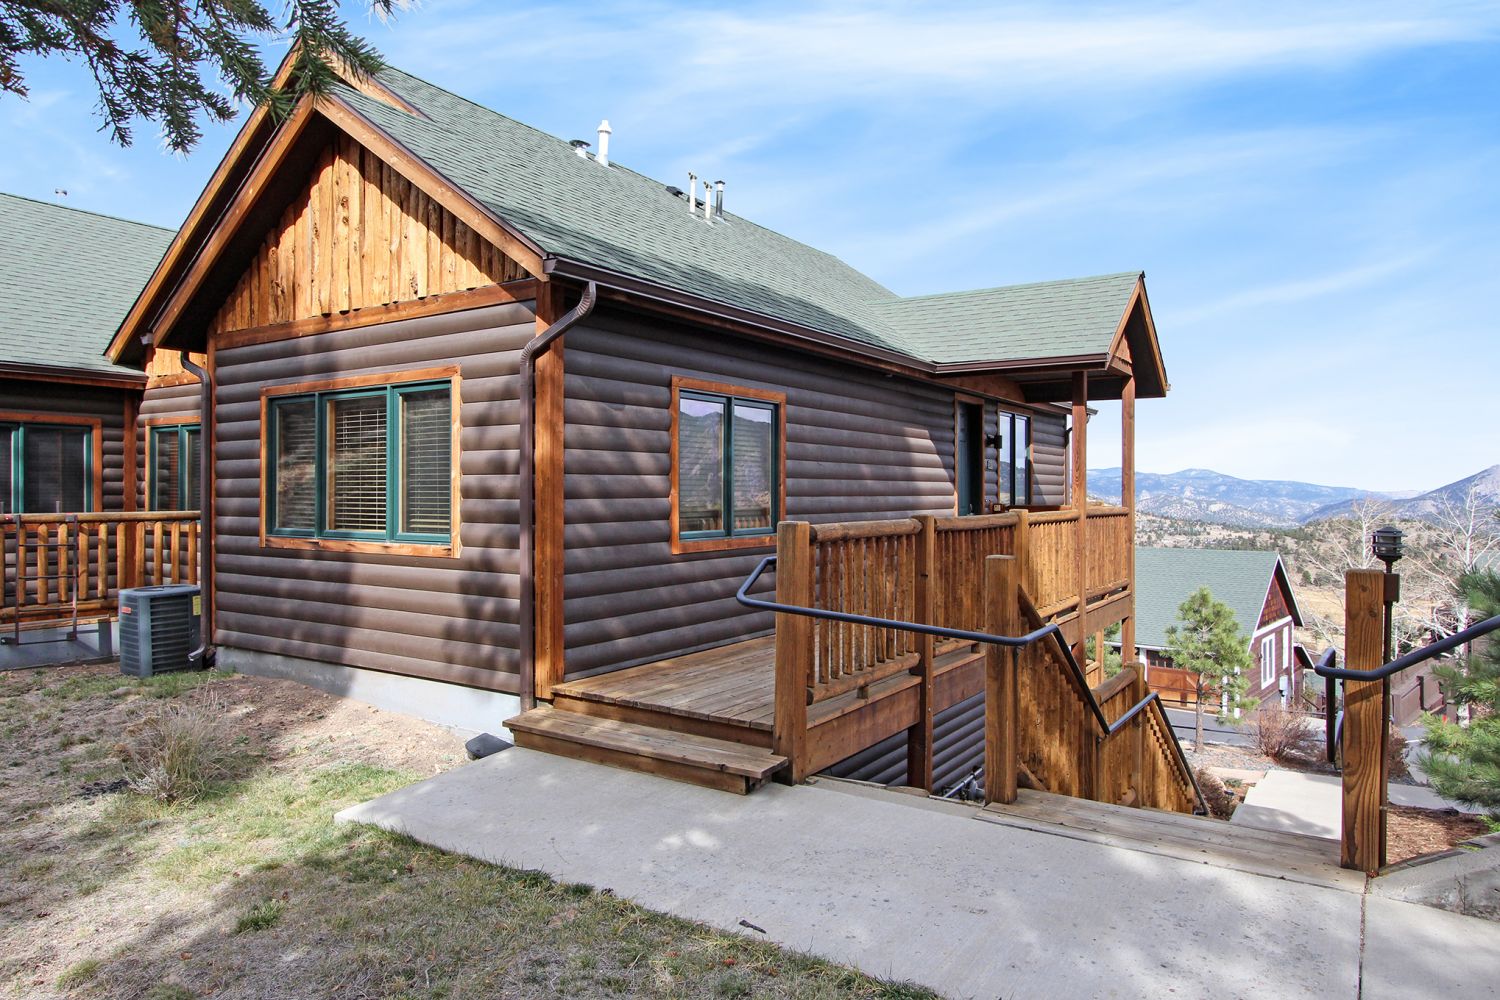 NO Parking Back here - Condo opens up to breathtaking views of Estes Park, Mary's Lake, and Rocky Mountain National Park. Must walk up to this unit and it has 37 stairs from parking lot to door.